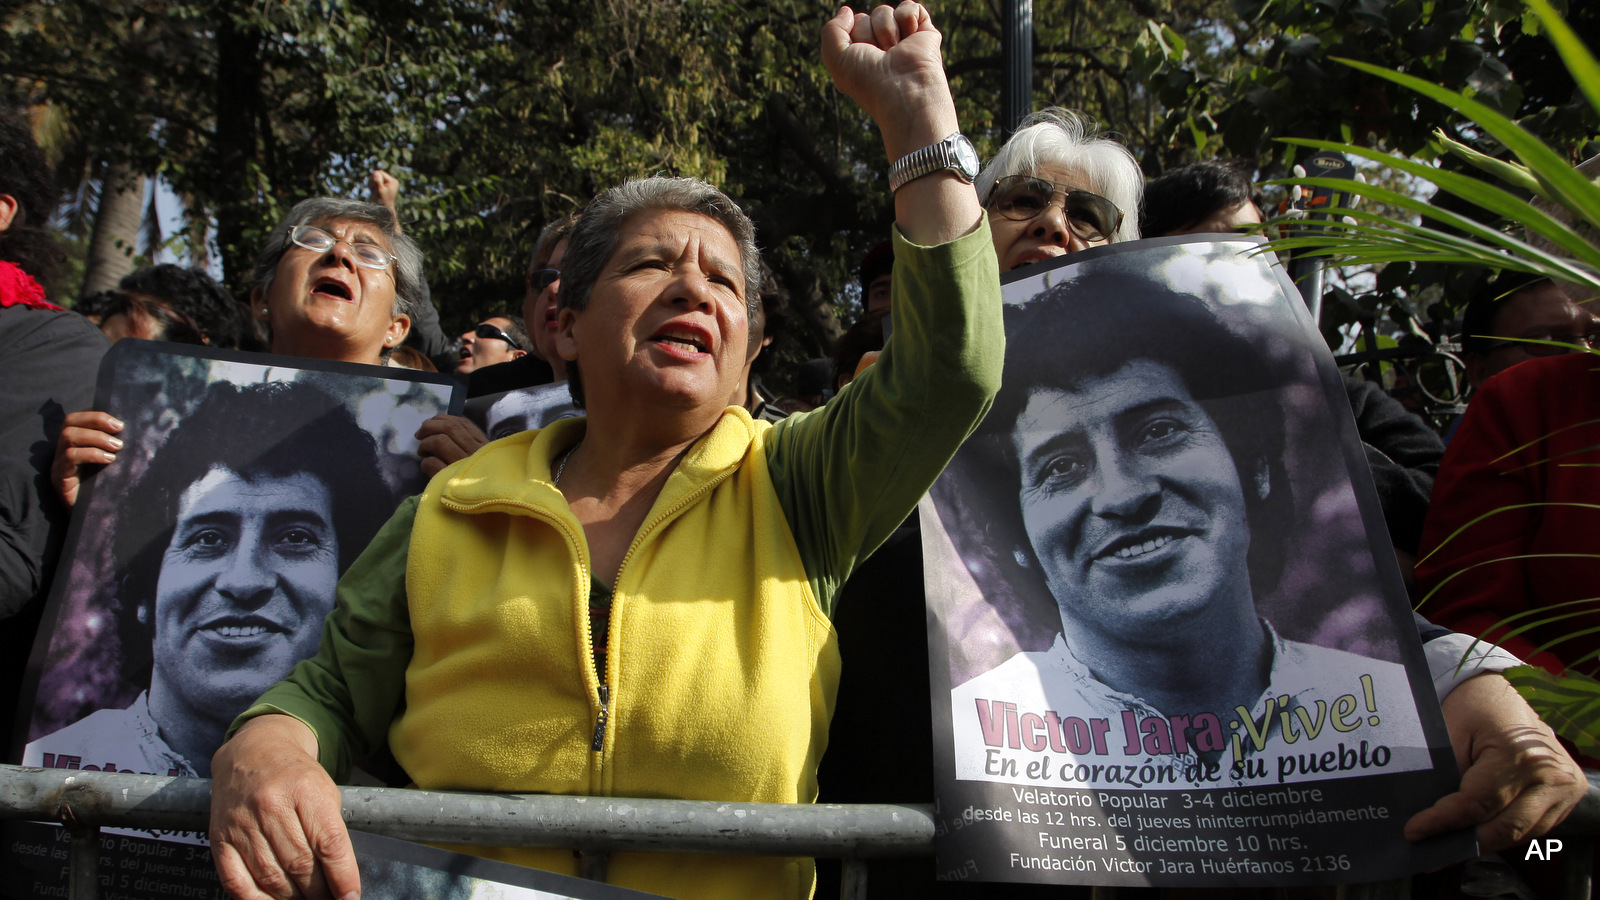 A woman gestures to the passing coffin of Chile's folk singer Victor Jara as others hold posters of him during his funeral procession in Santiago, Saturday, Dec. 5, 2009.  Jara's burial comes 36 years after he was beaten and shot by soldiers in a stadium where the military gathered thousands of arrested supporters of ousted president Salvador Allende in the days following the 1973 military coup led by Gen. Augusto Pinochet.  Jara's body was exhumed six months ago for a proper autopsy as part of an ongoing investigation to determine the circumstances of his death.